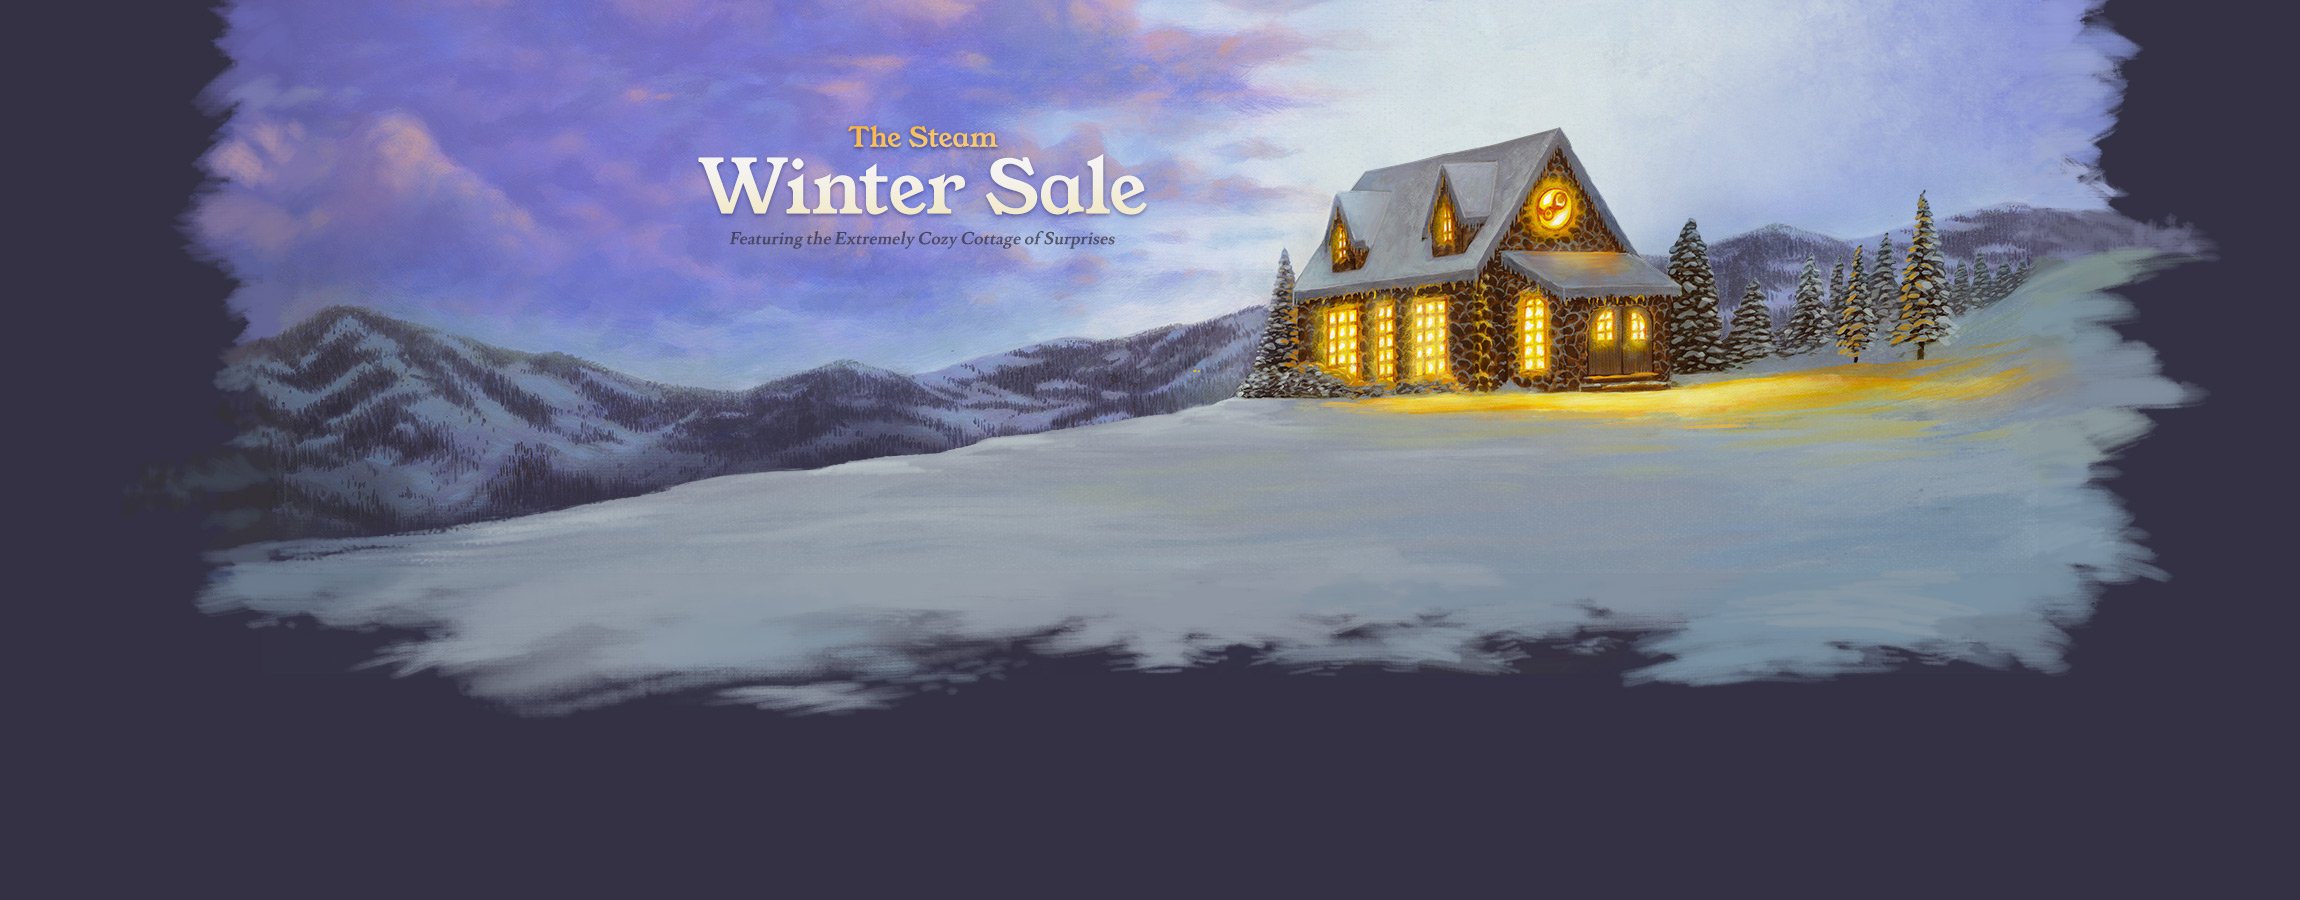 Steam Winter Sale 18 Store Page Background With Text Removed 2300x900 R Steam